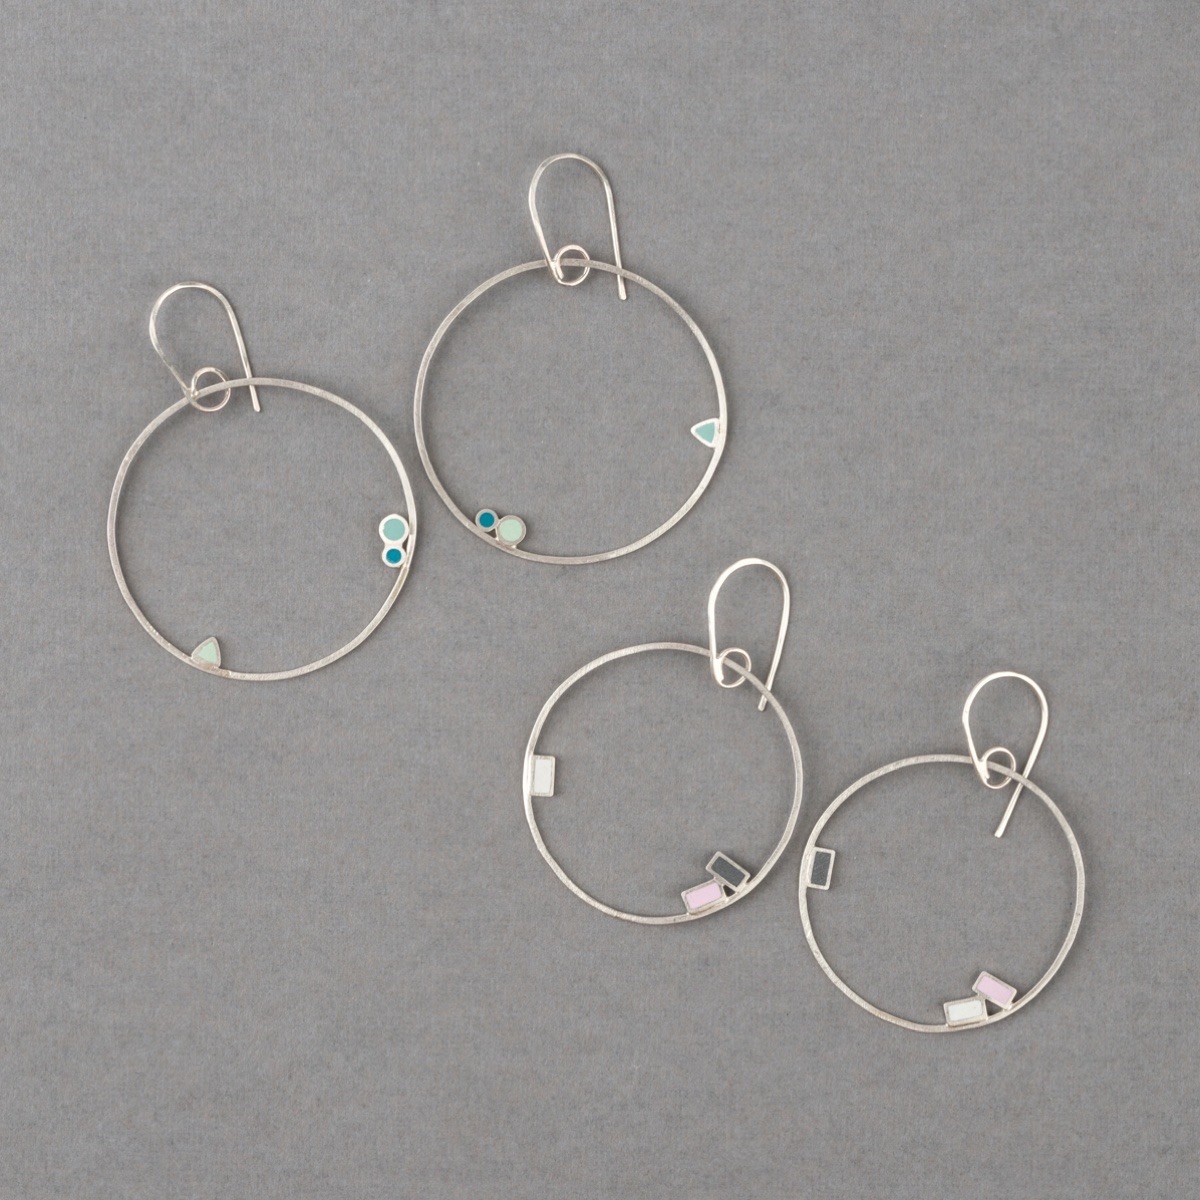 Recycled sterling silver hoop earrings with little dots of colourful resin handmade by Clare Lloyd Jewellery